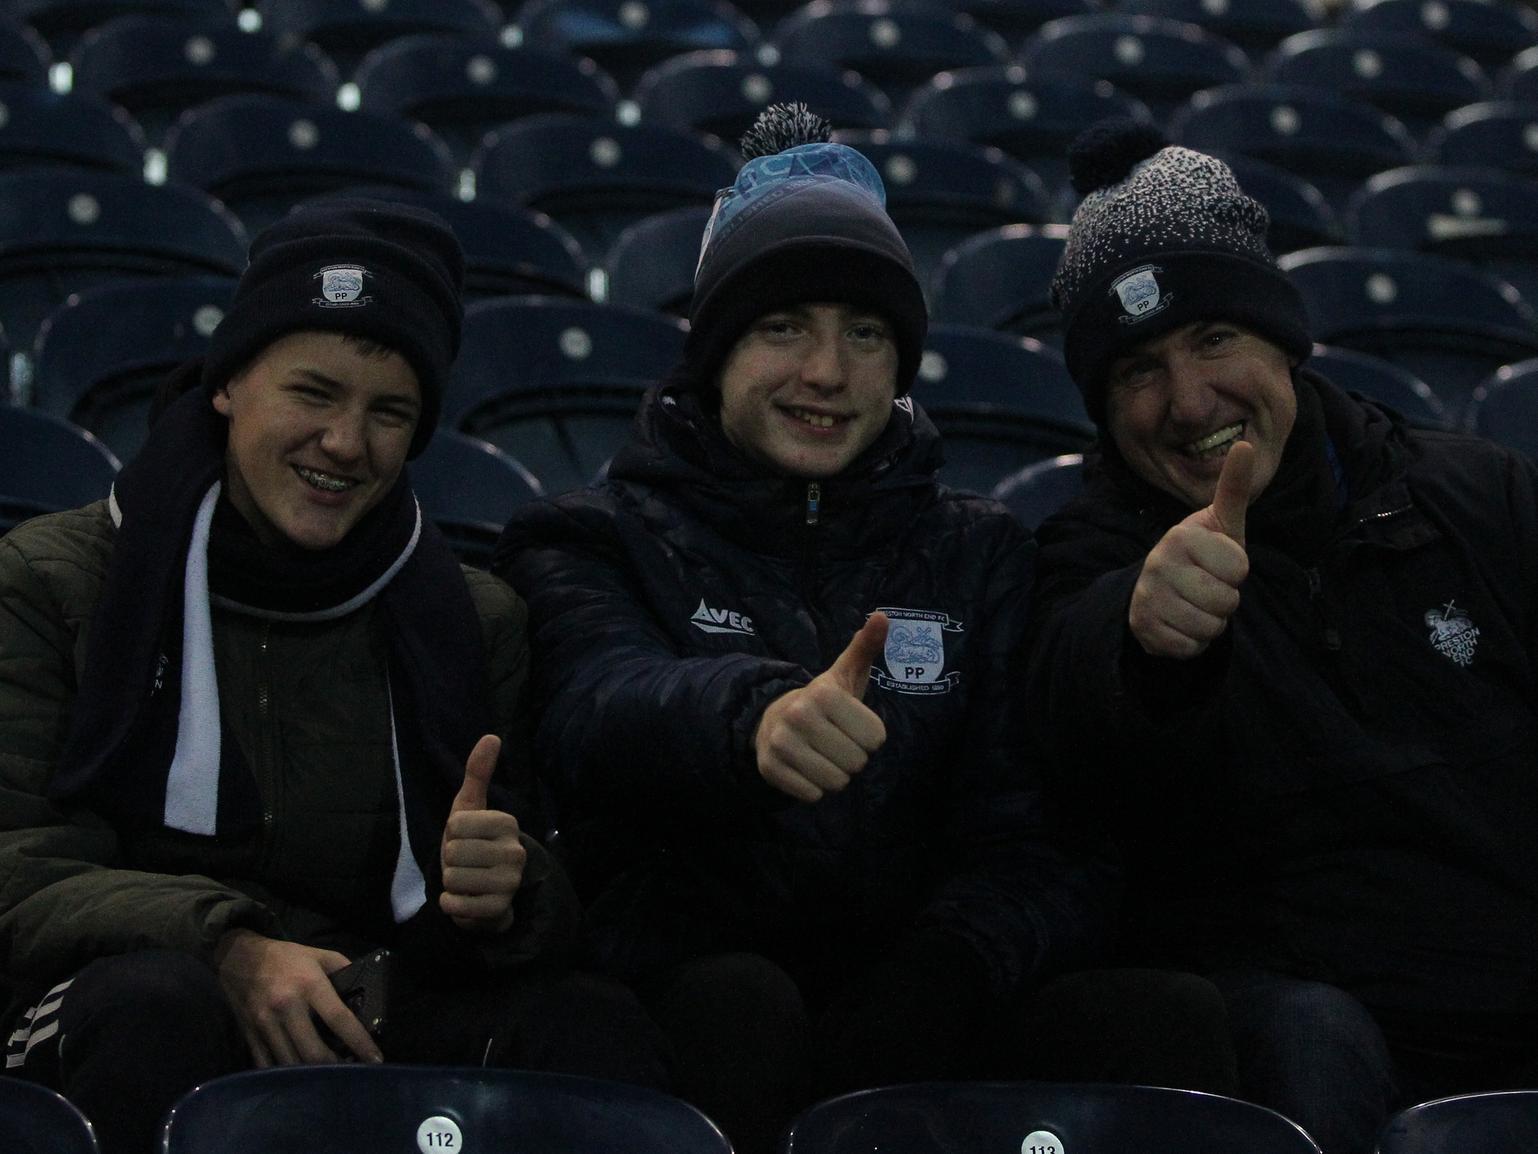 These three fans were in a positive mood ahead of the big televised game against West Bromwich Albion.